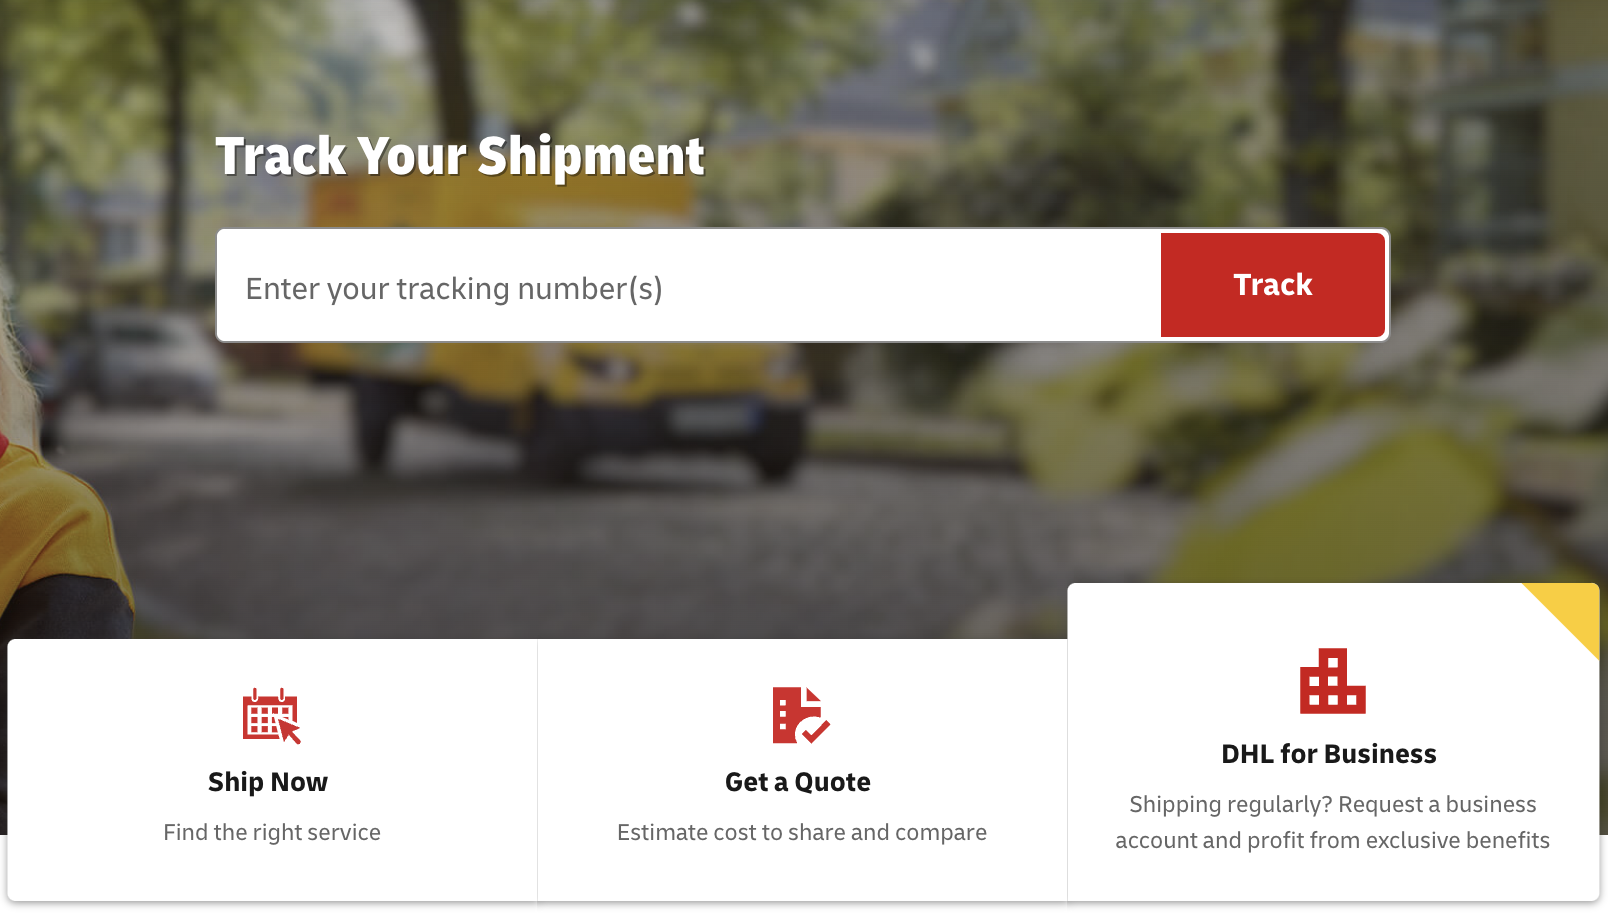 How Does Overnight Shipping Works?